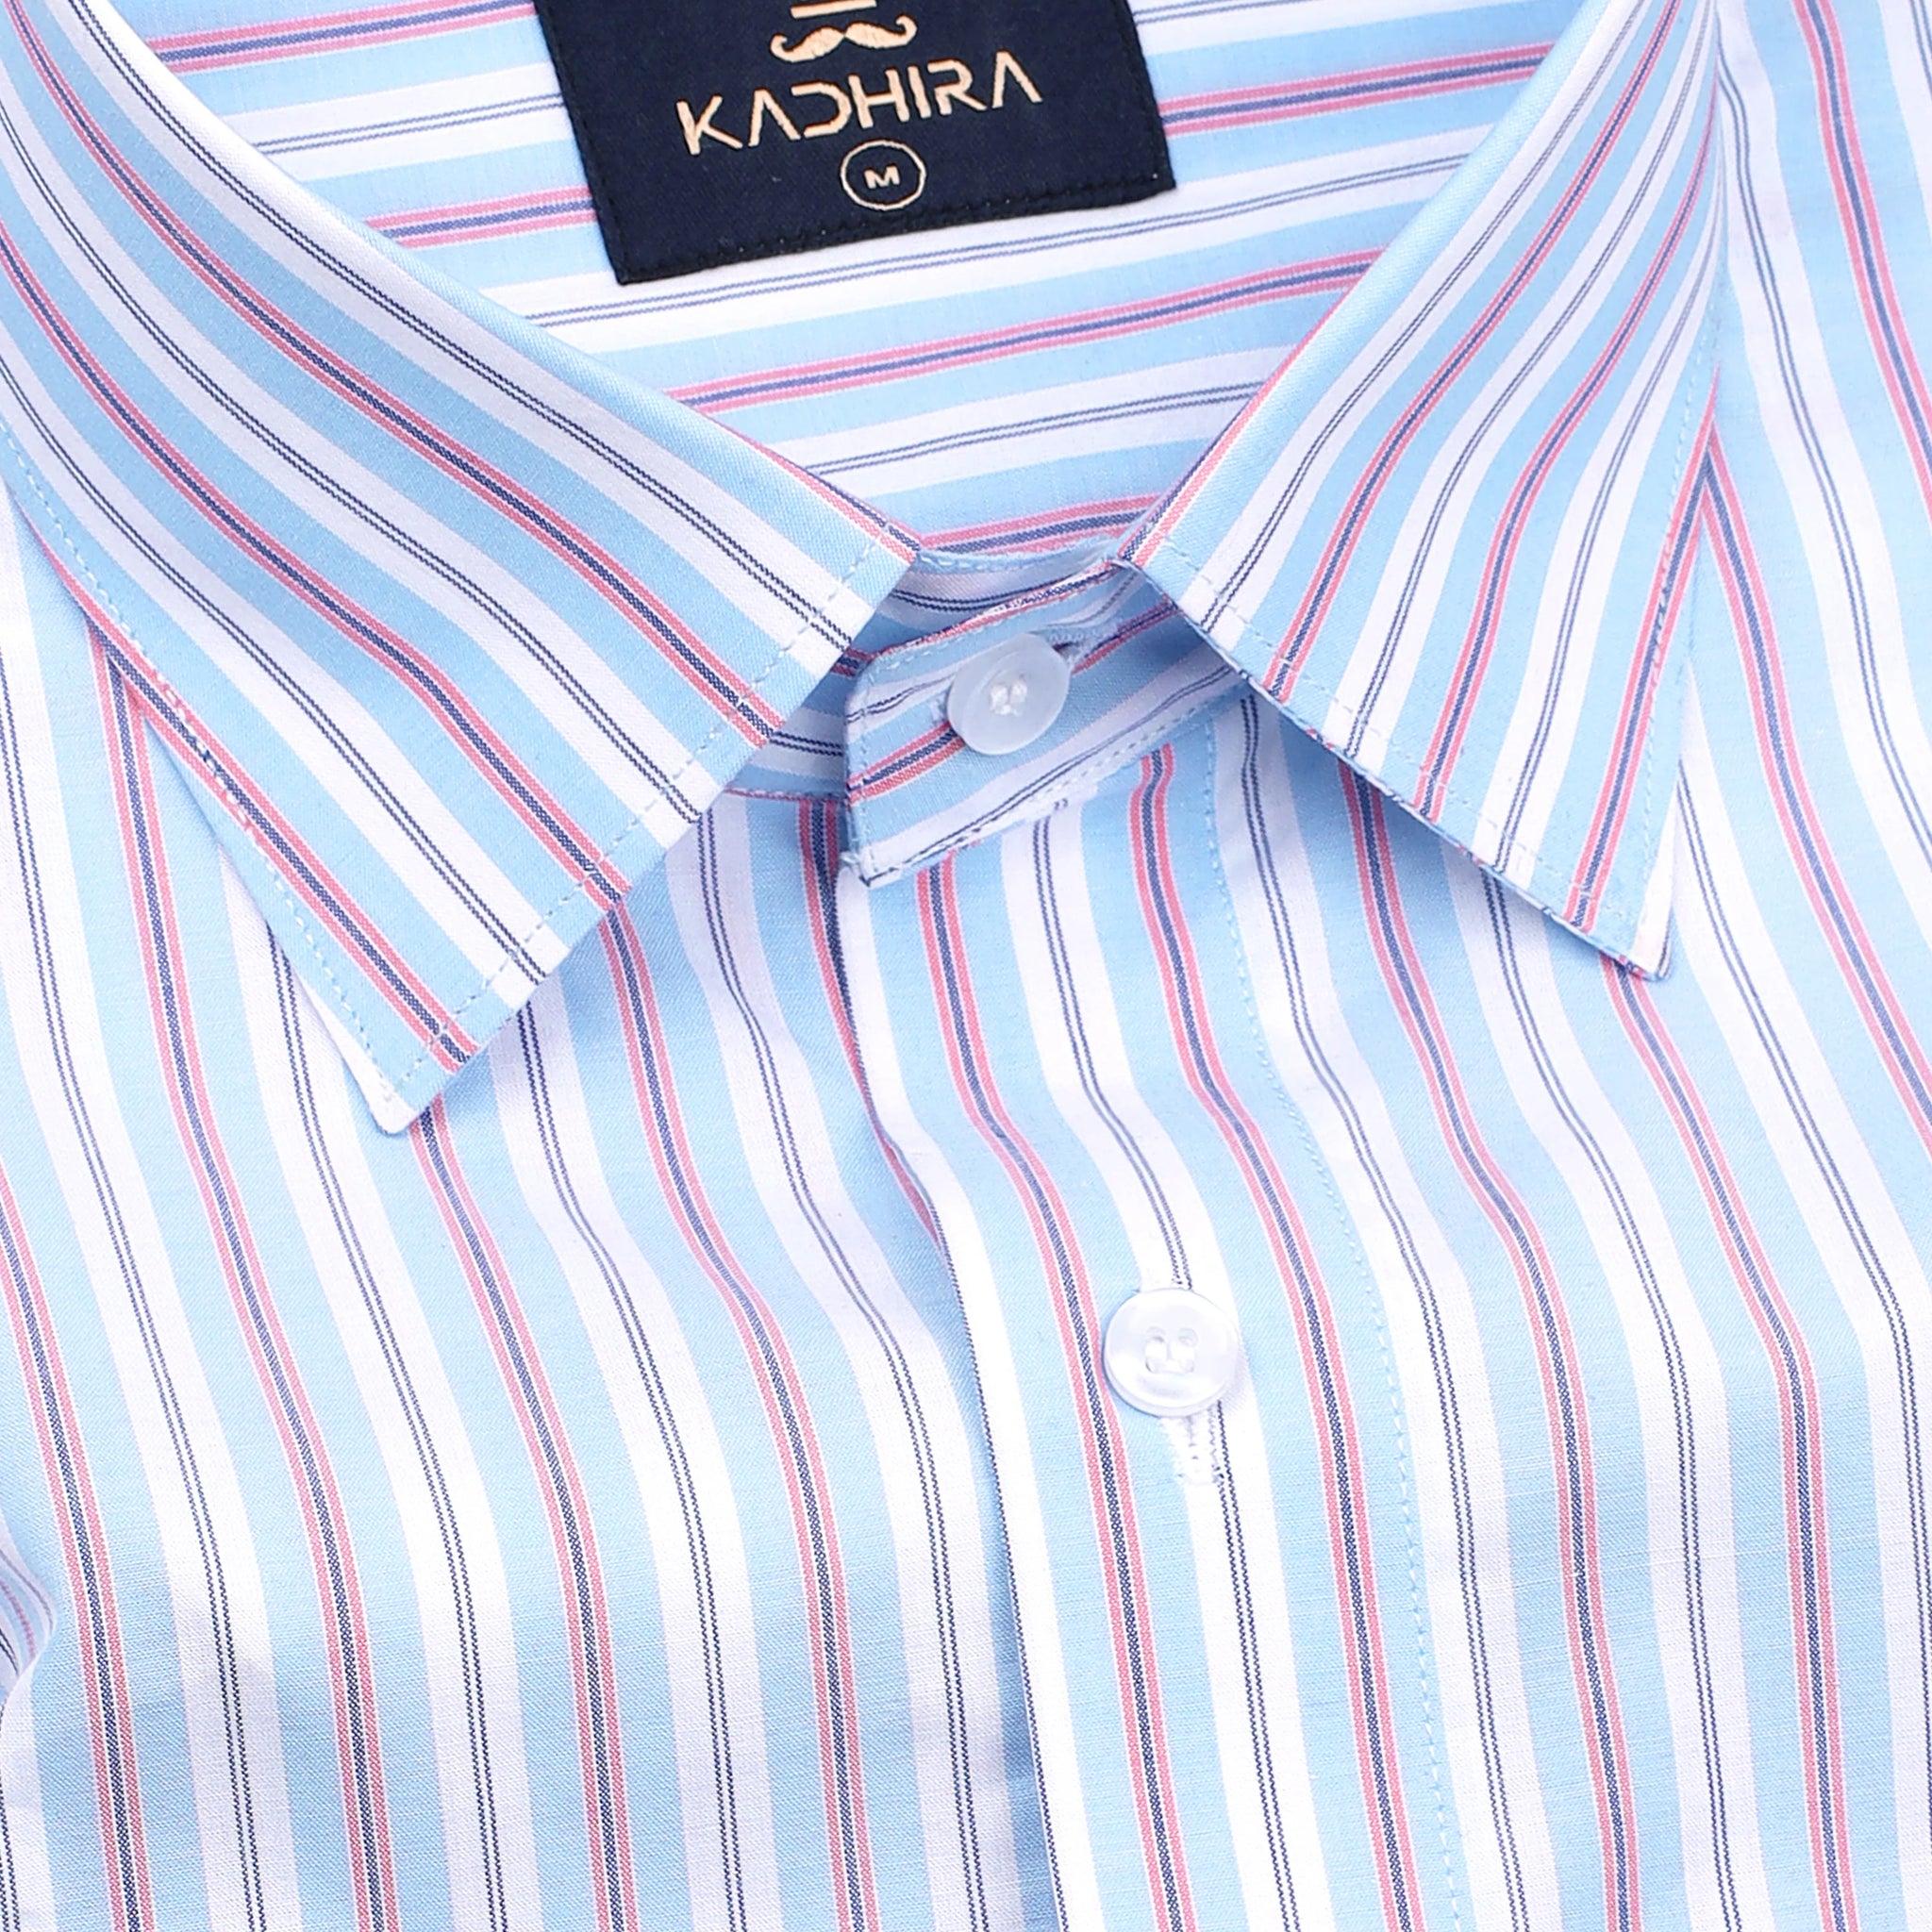 Columbia Blue With Baby Pink Hairline Stripes Premium Cotton Shirt